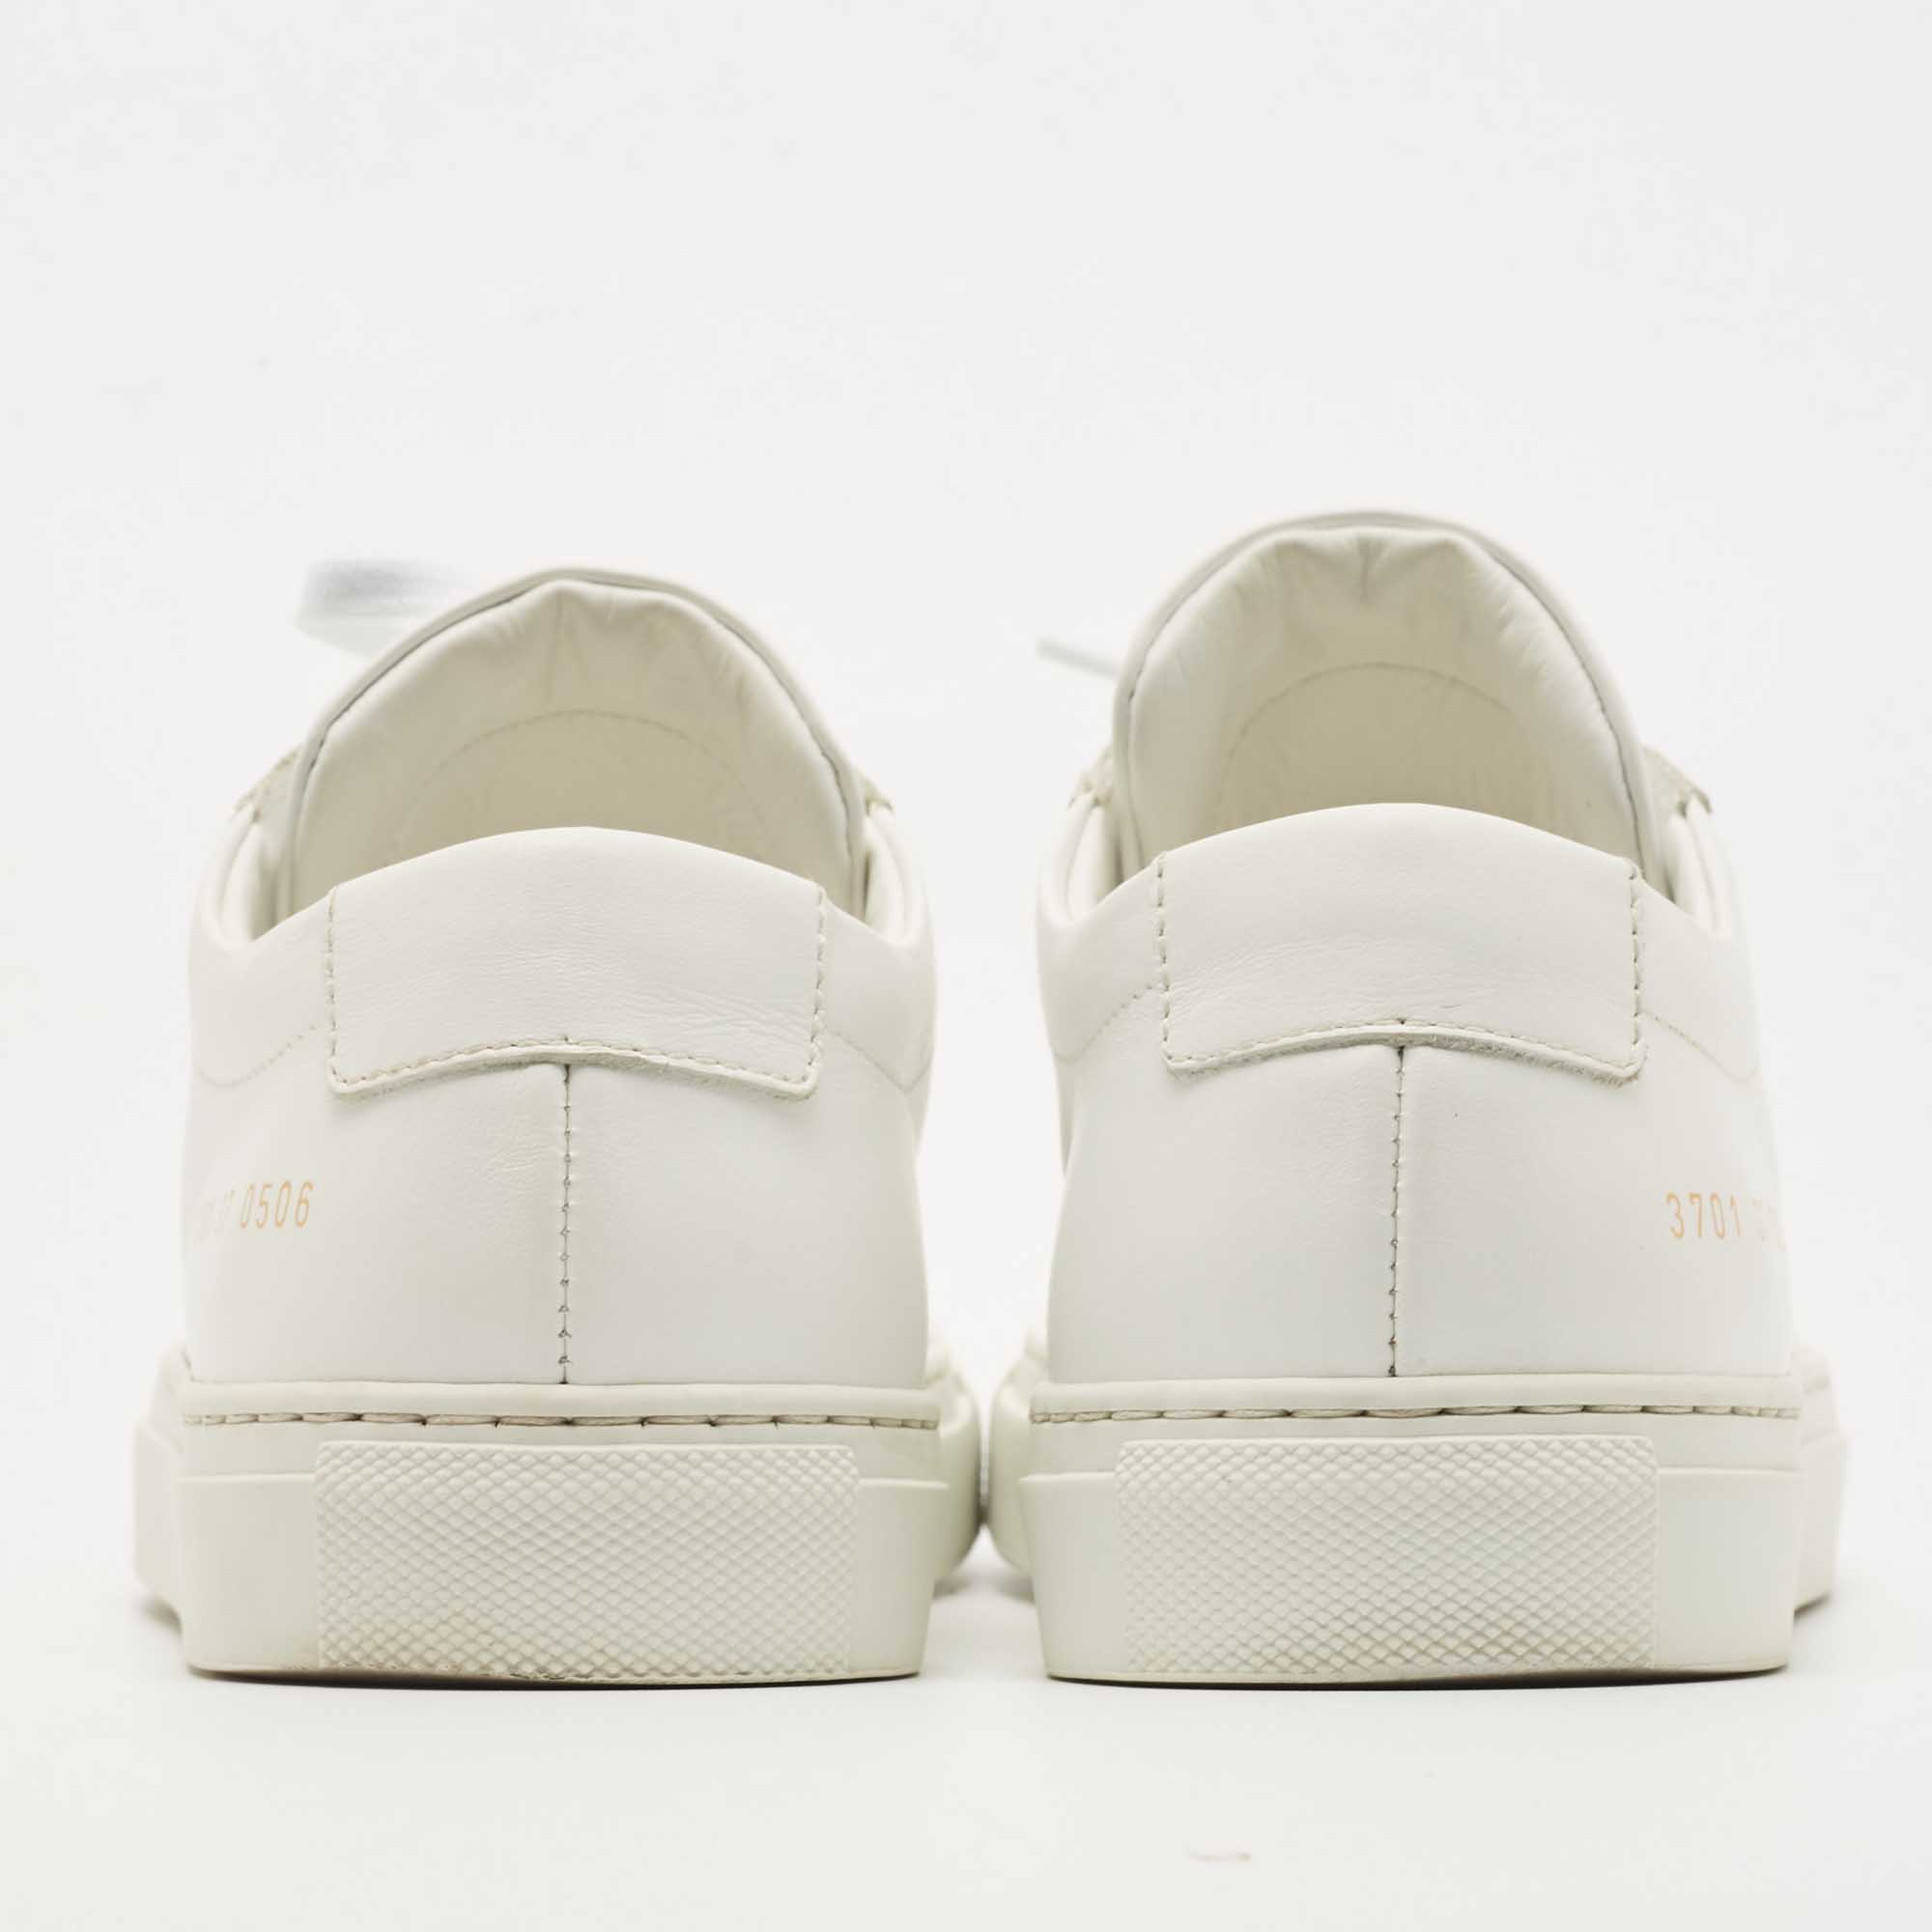 Common Projects White Leather Achilles Low Top Sneakers Size 37